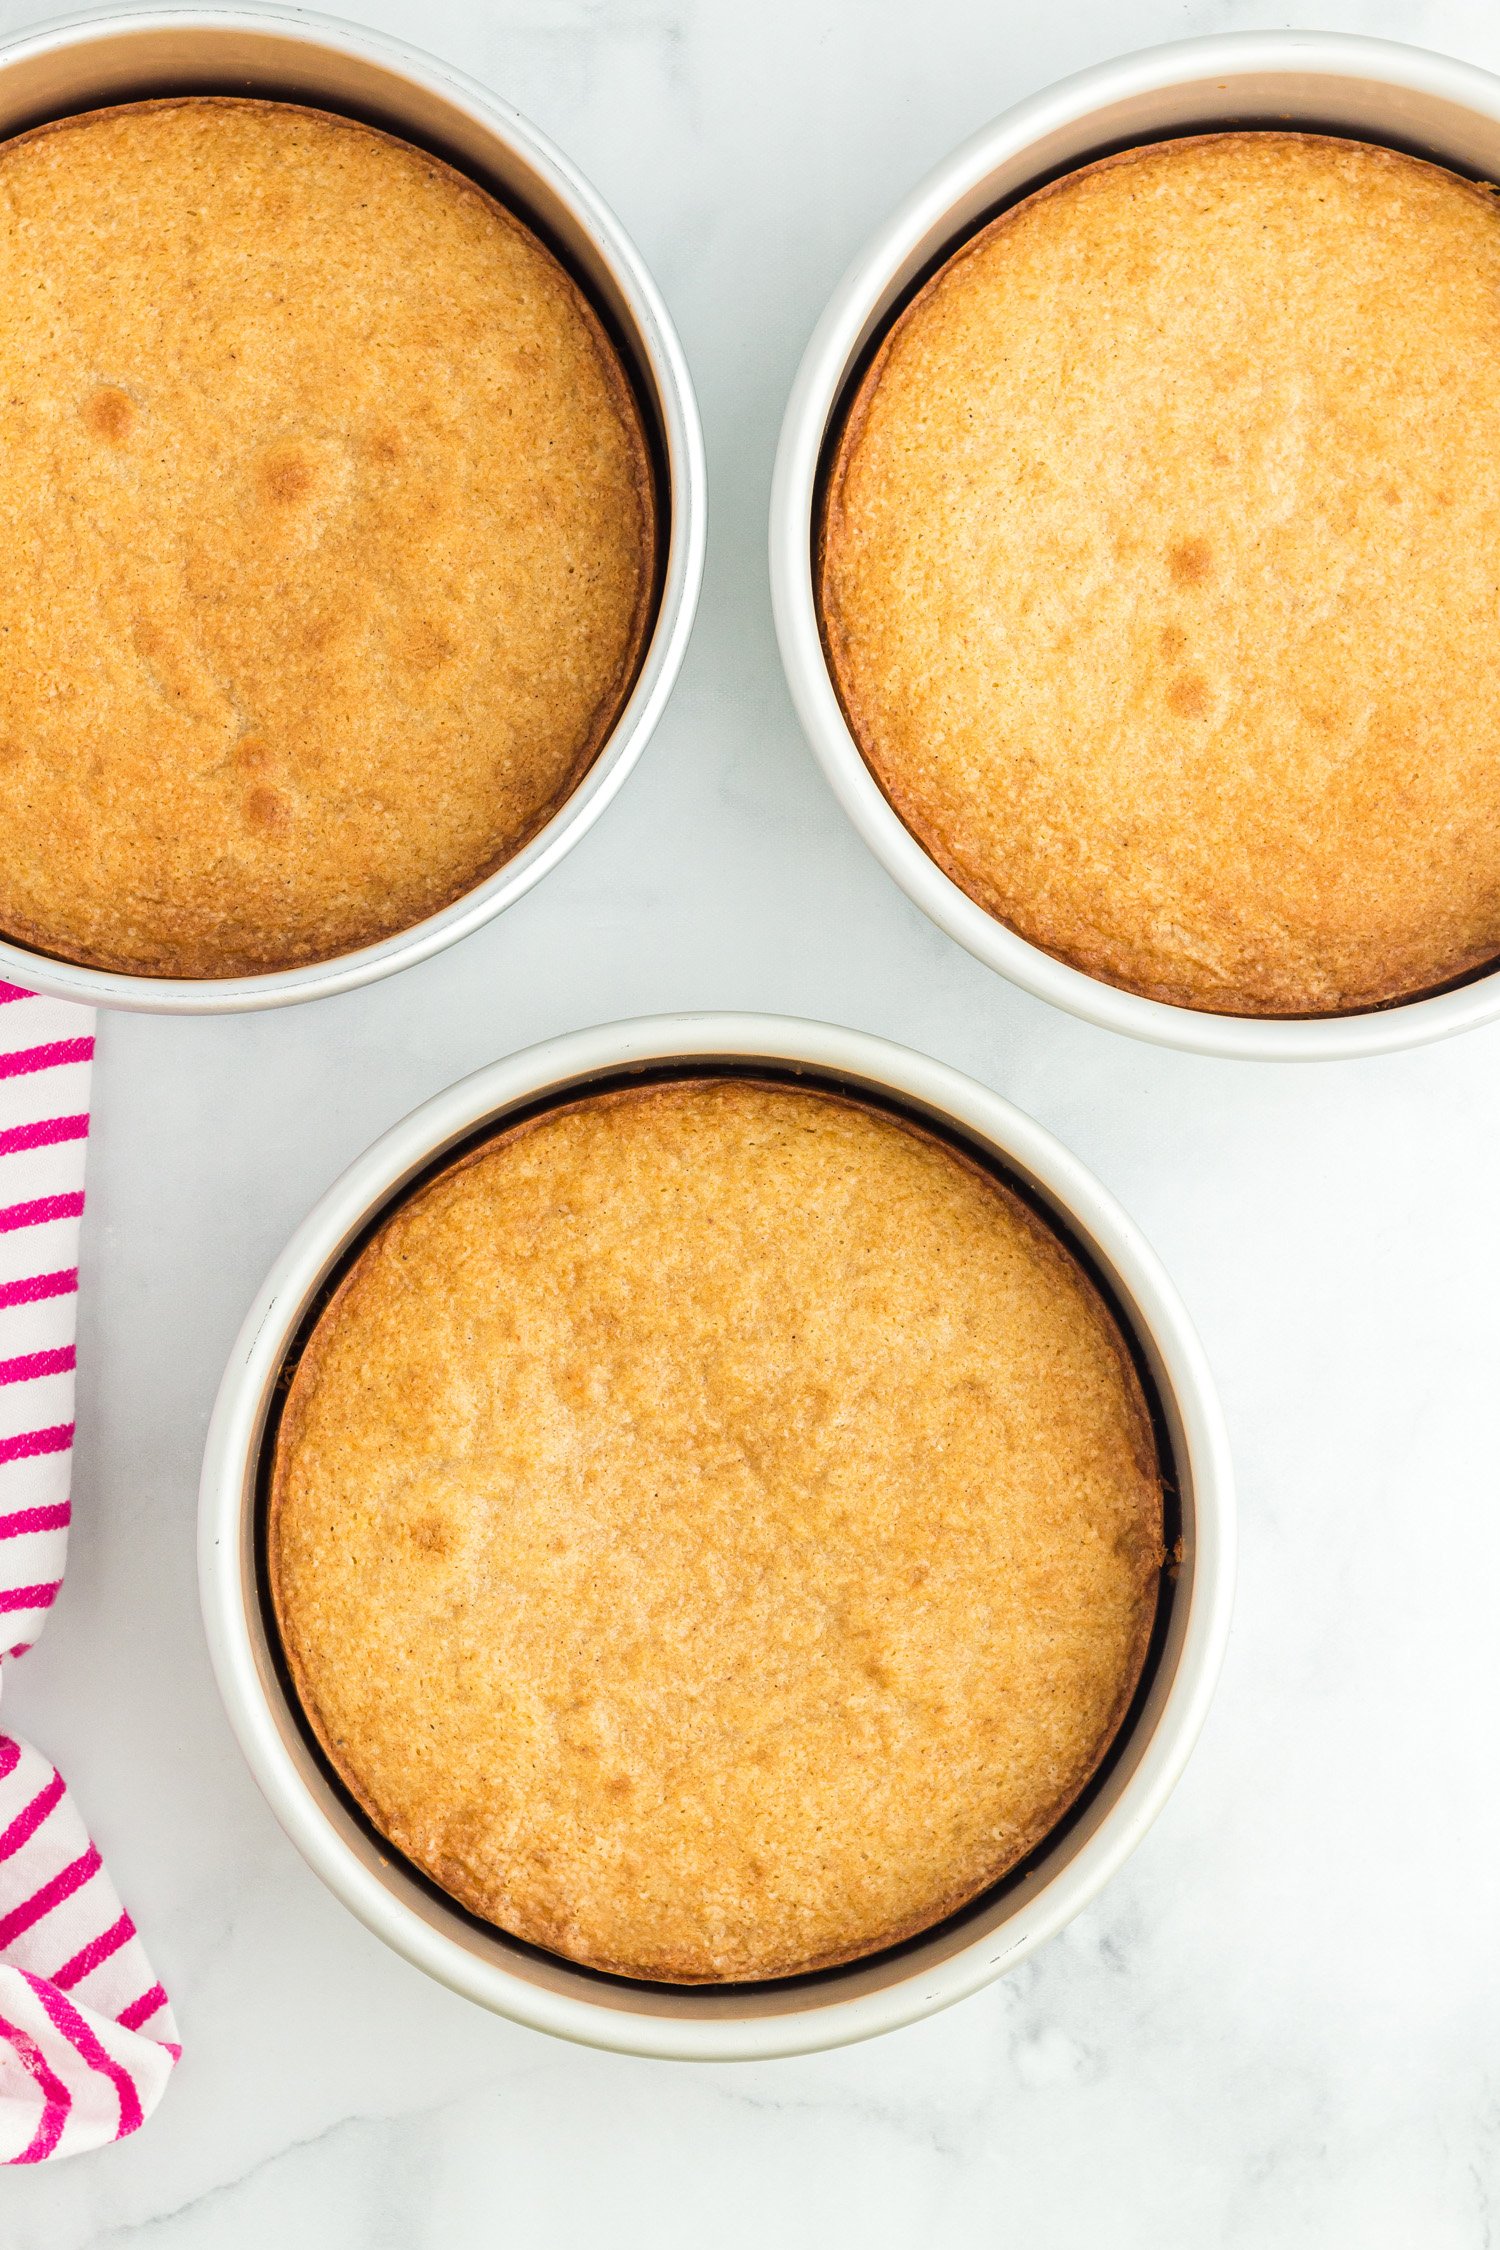 golden brown cakes baked from the oven